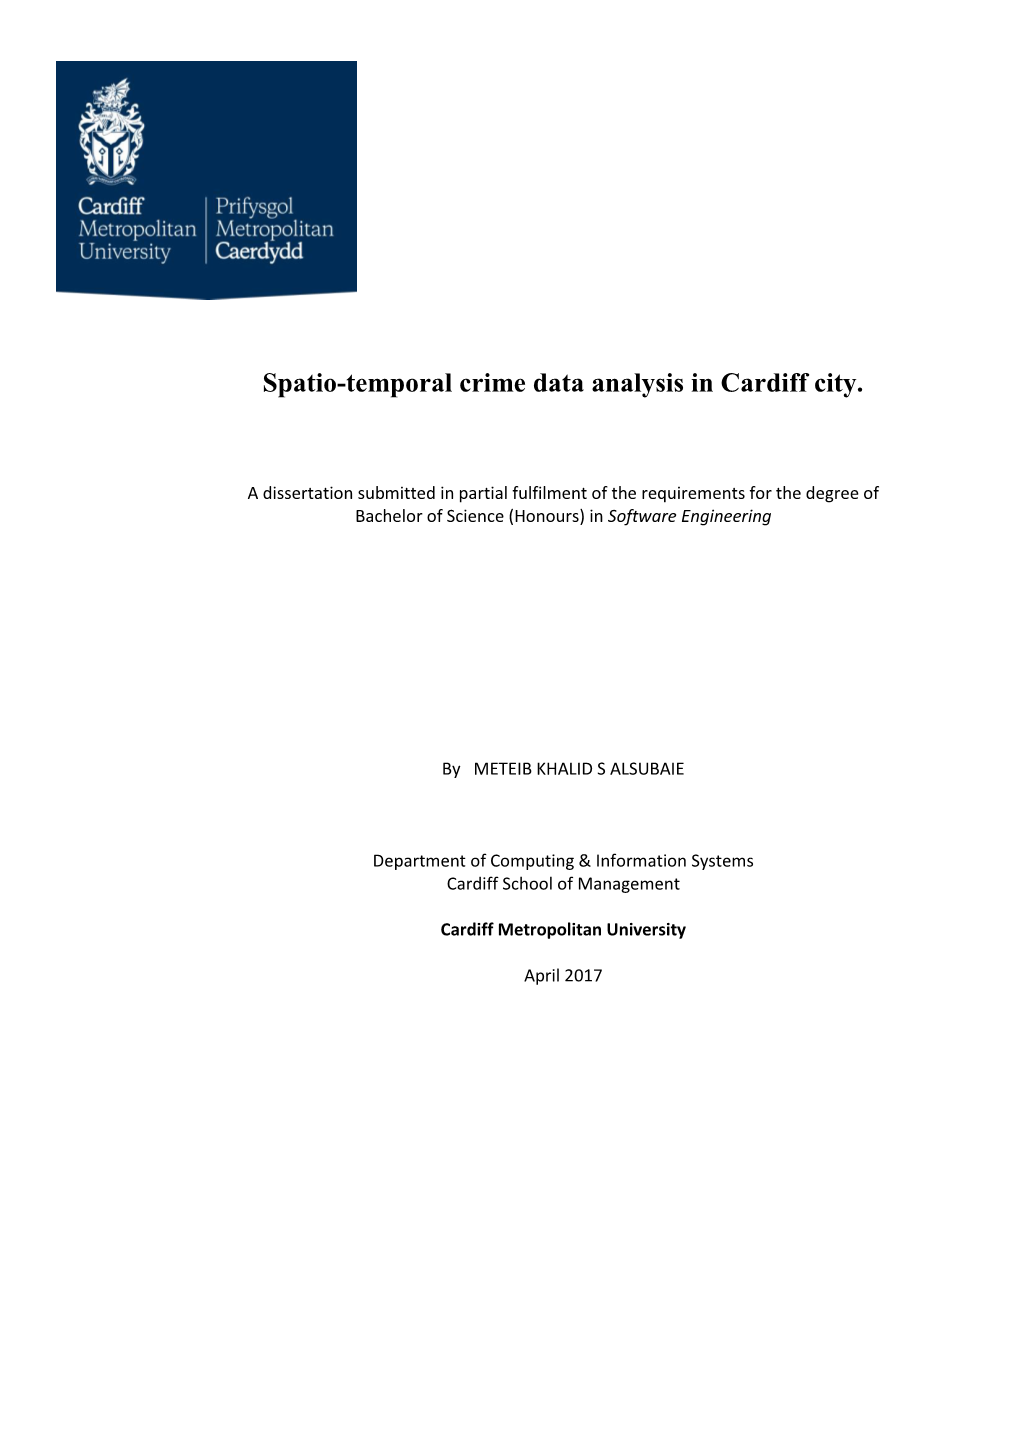 Spatio-Temporal Crime Data Analysis in Cardiff City